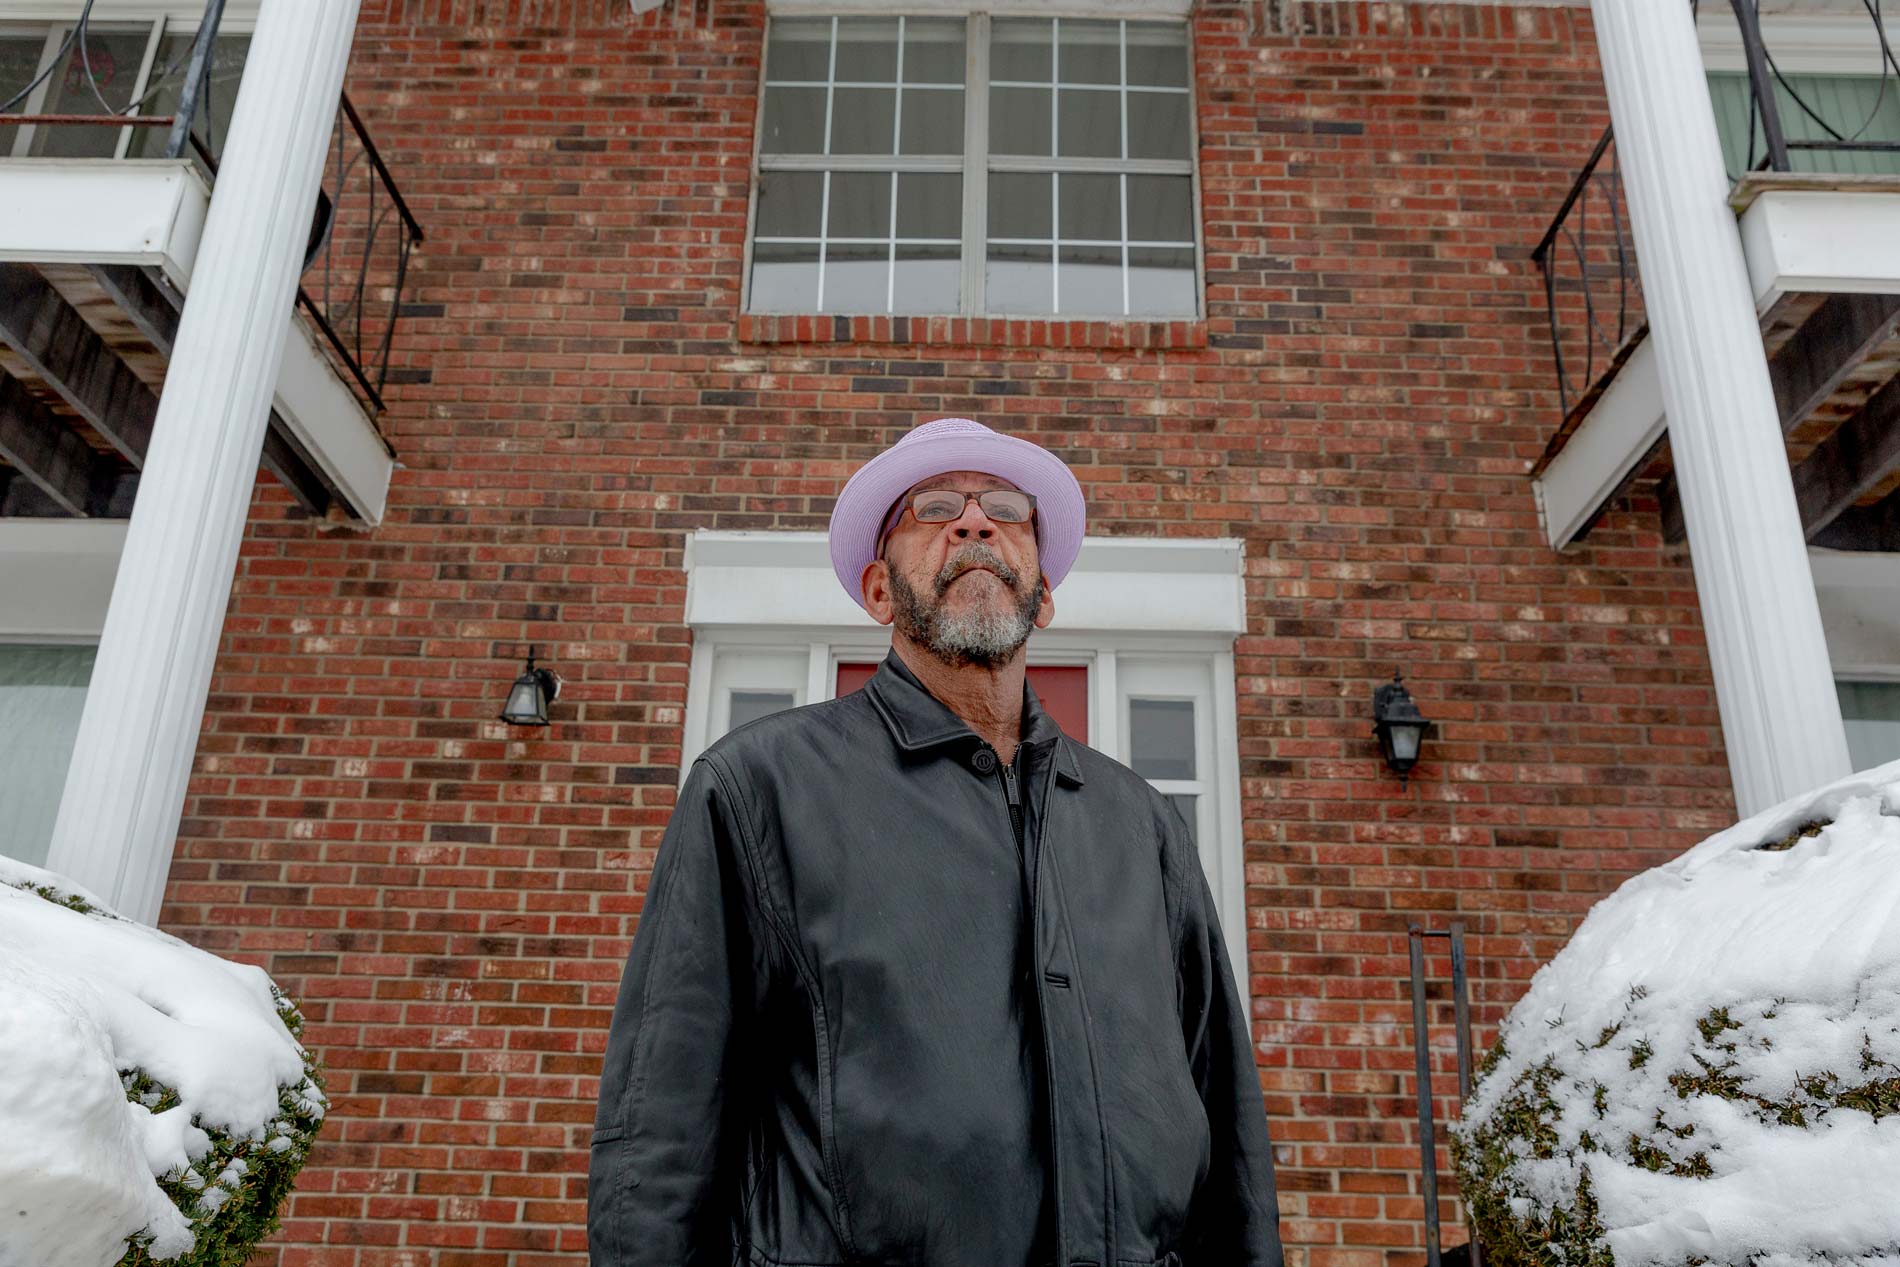 Gerry Thomas, 64, outside of his apartment  in Sterling Heights, Michigan on Feb. 7, 2022. (Image: Sylvia Jarrus/Innocence Project)